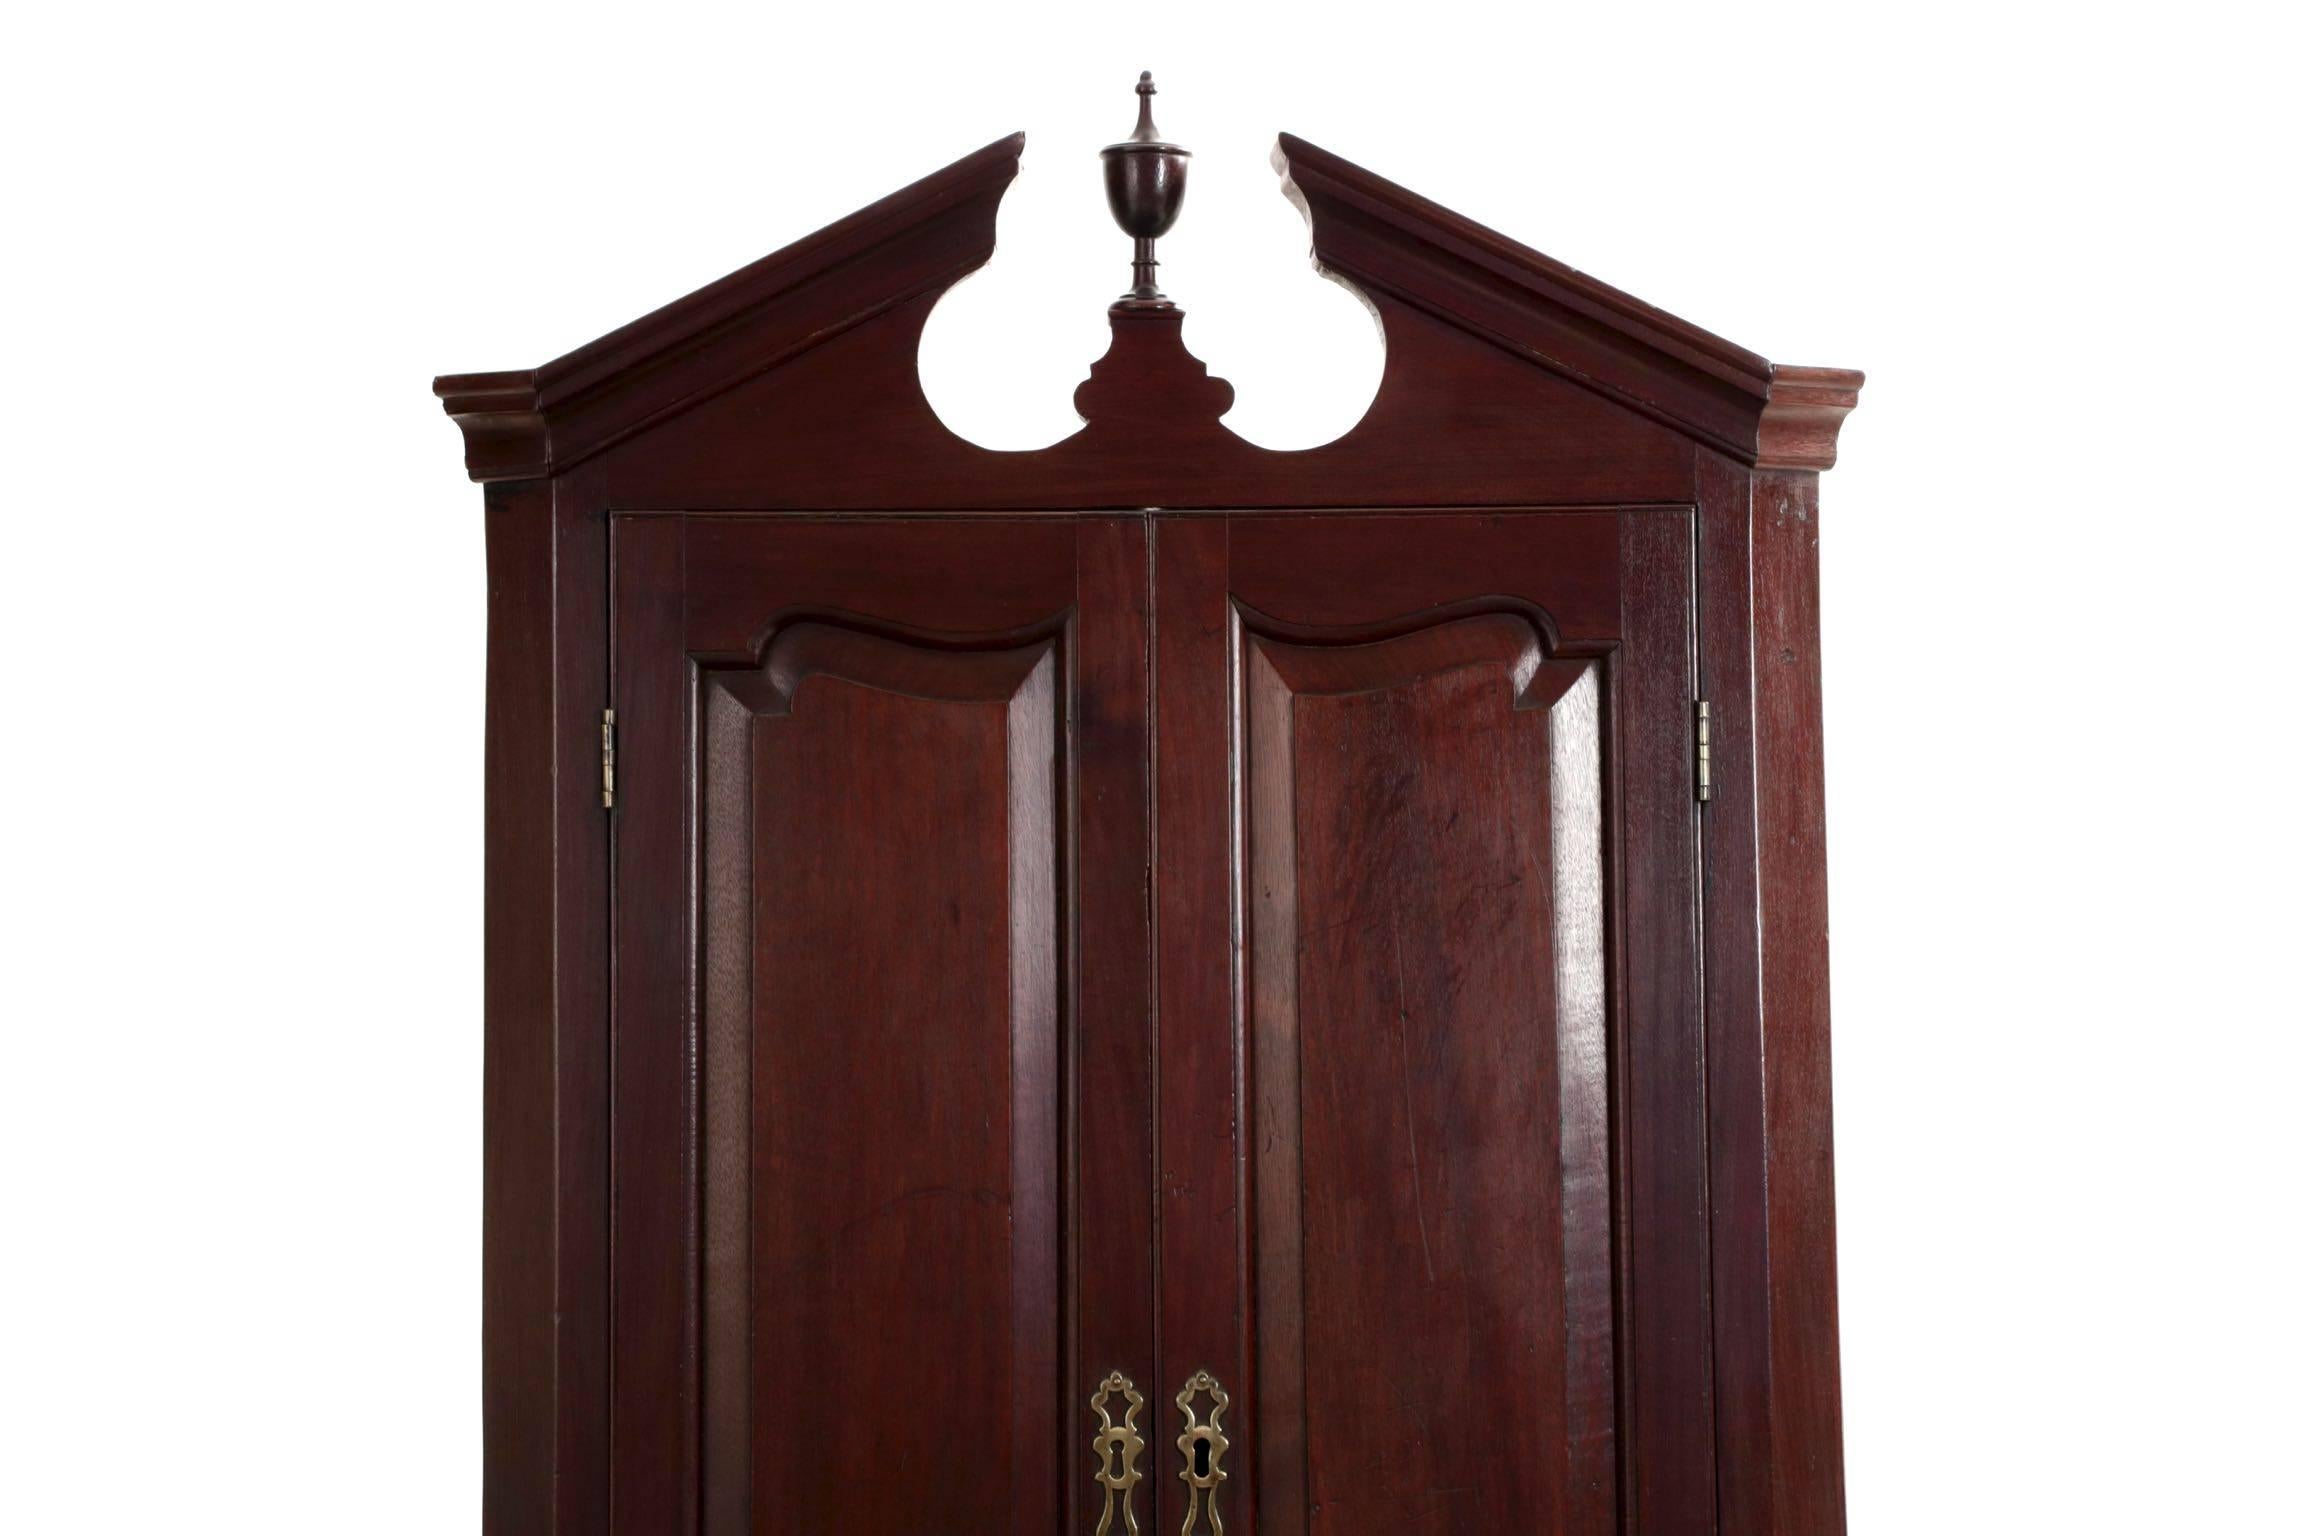 A most attractive hanging corner cupboard, it displays with a most attractive angularity emphasized by the cove-molded broken-arch crest flanking a single turned finial raised on an integral plinth. The sides of the case bevel to visually soften the